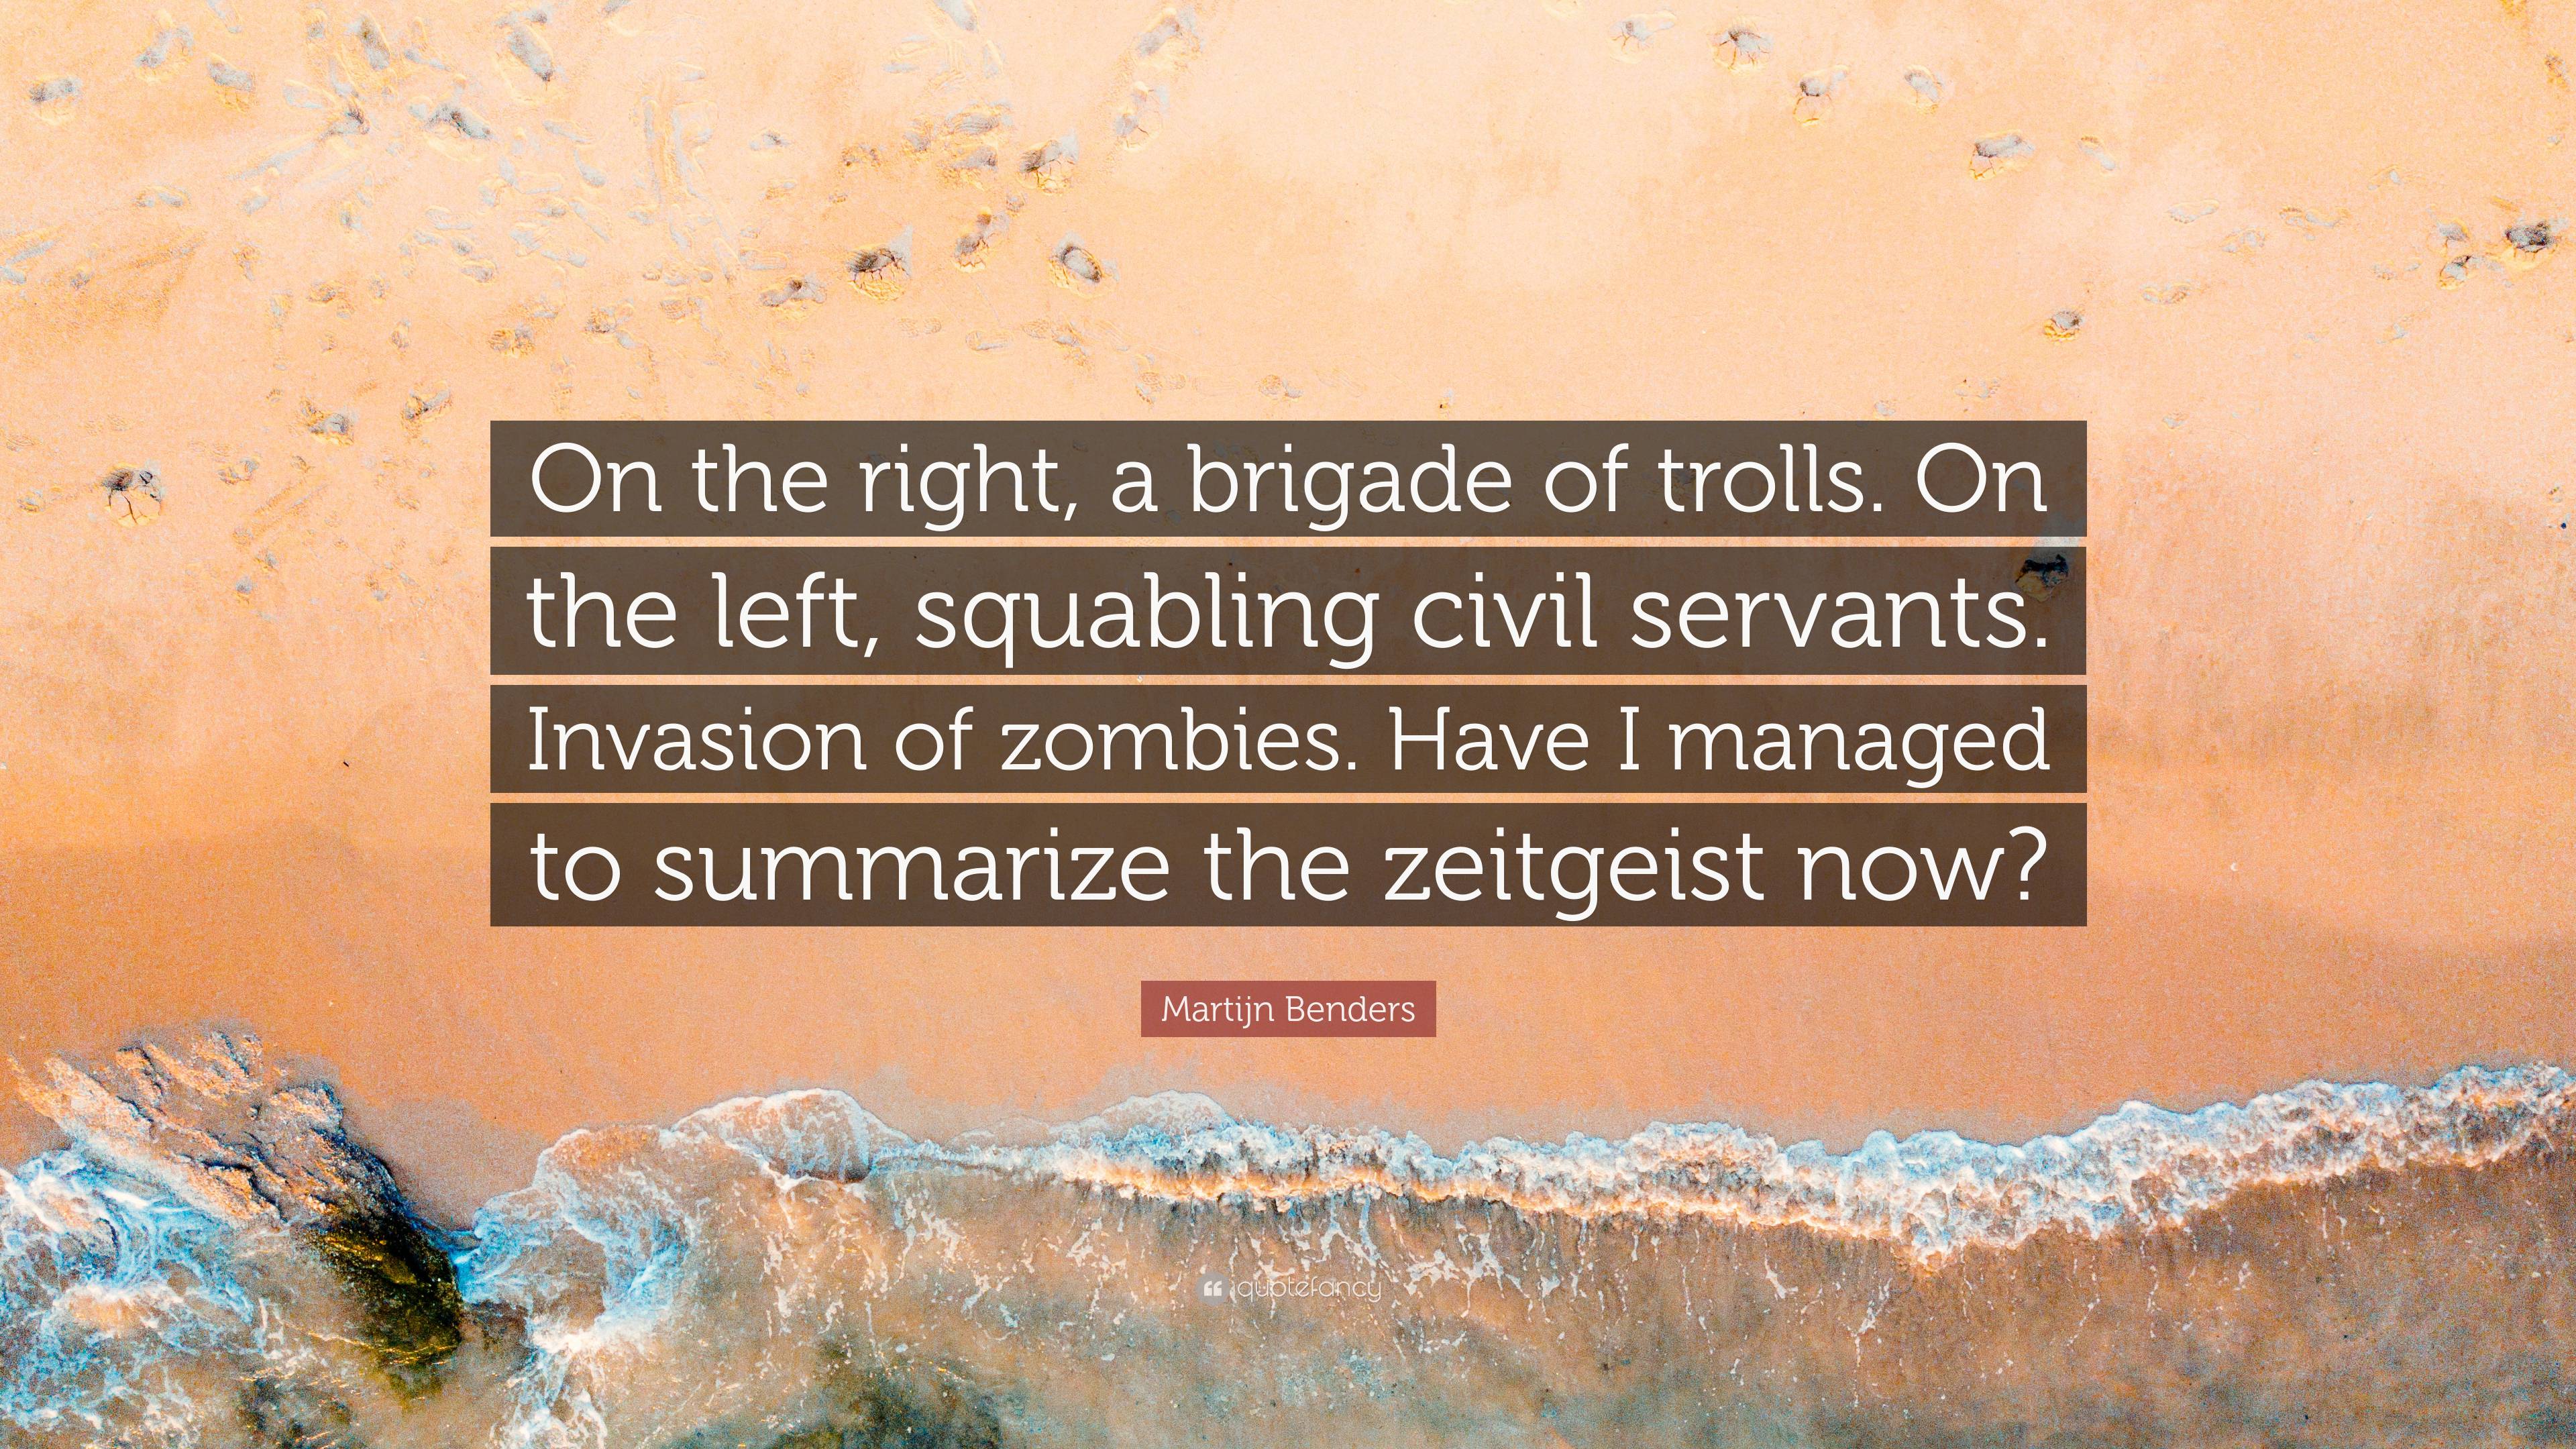 Martijn Benders Quote: “On the right, a brigade of trolls. On the